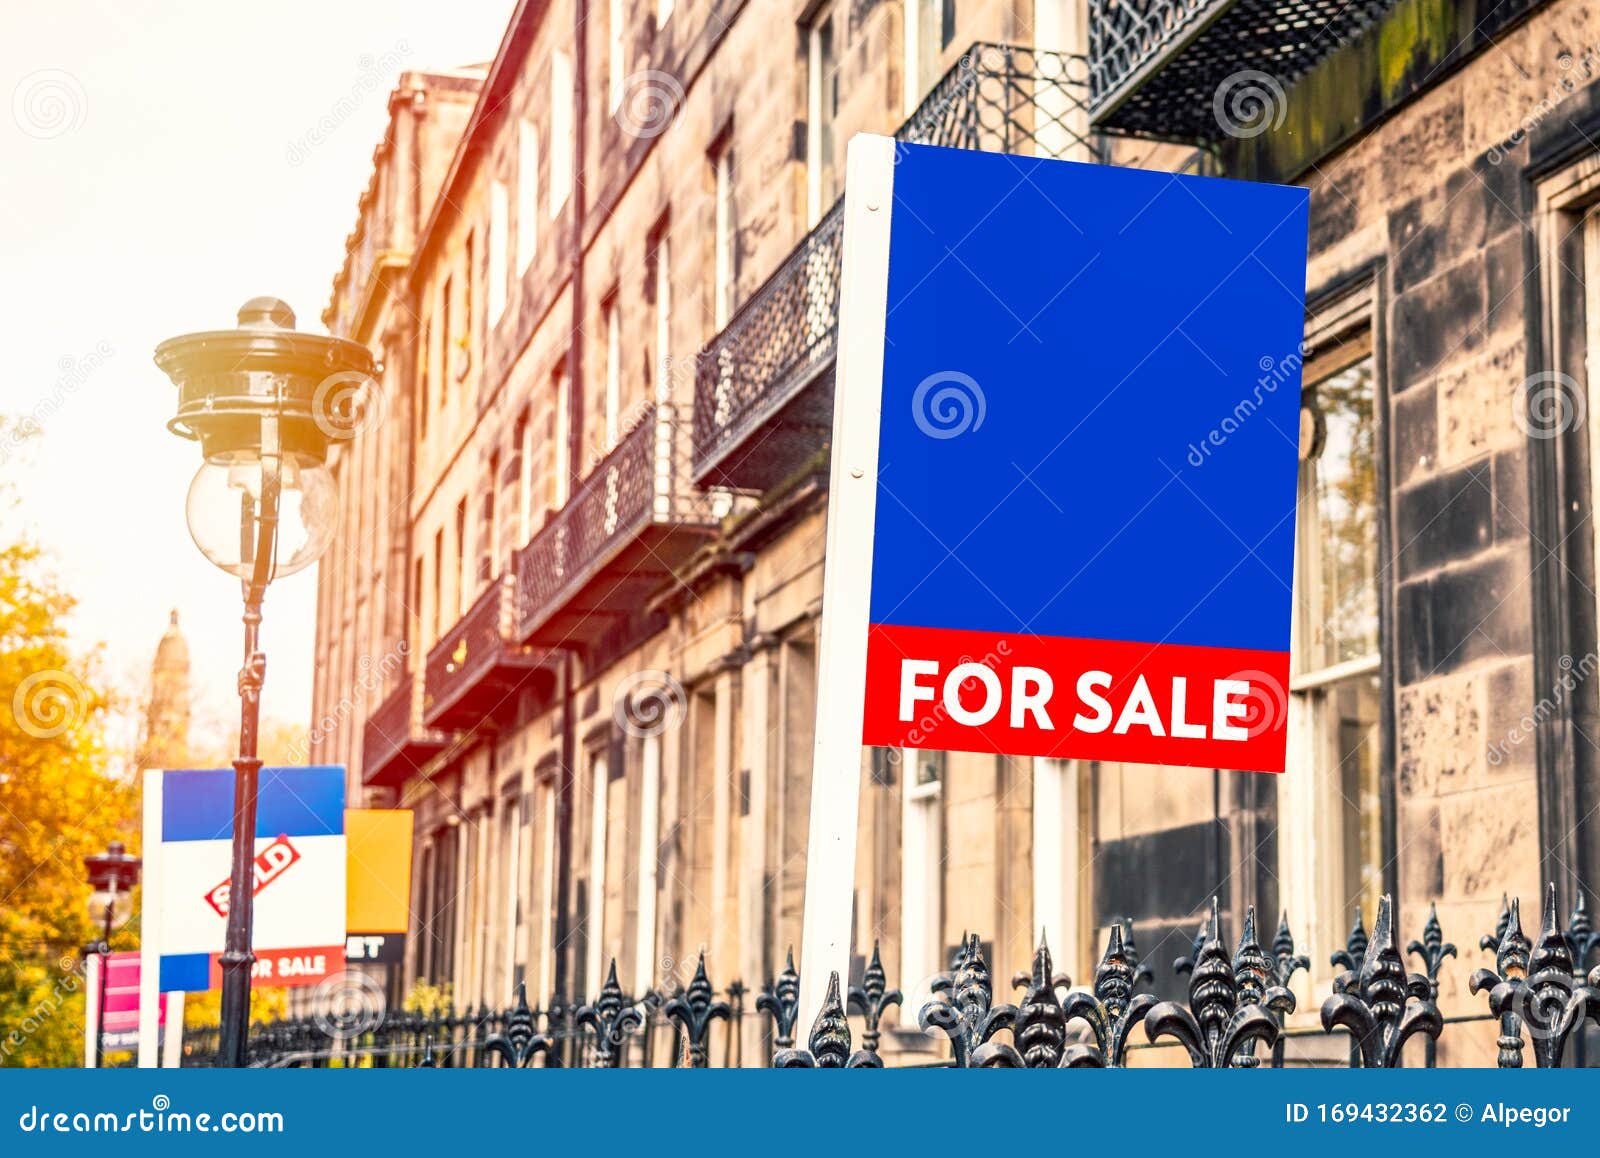 real estate sign in fornt of a house on sale